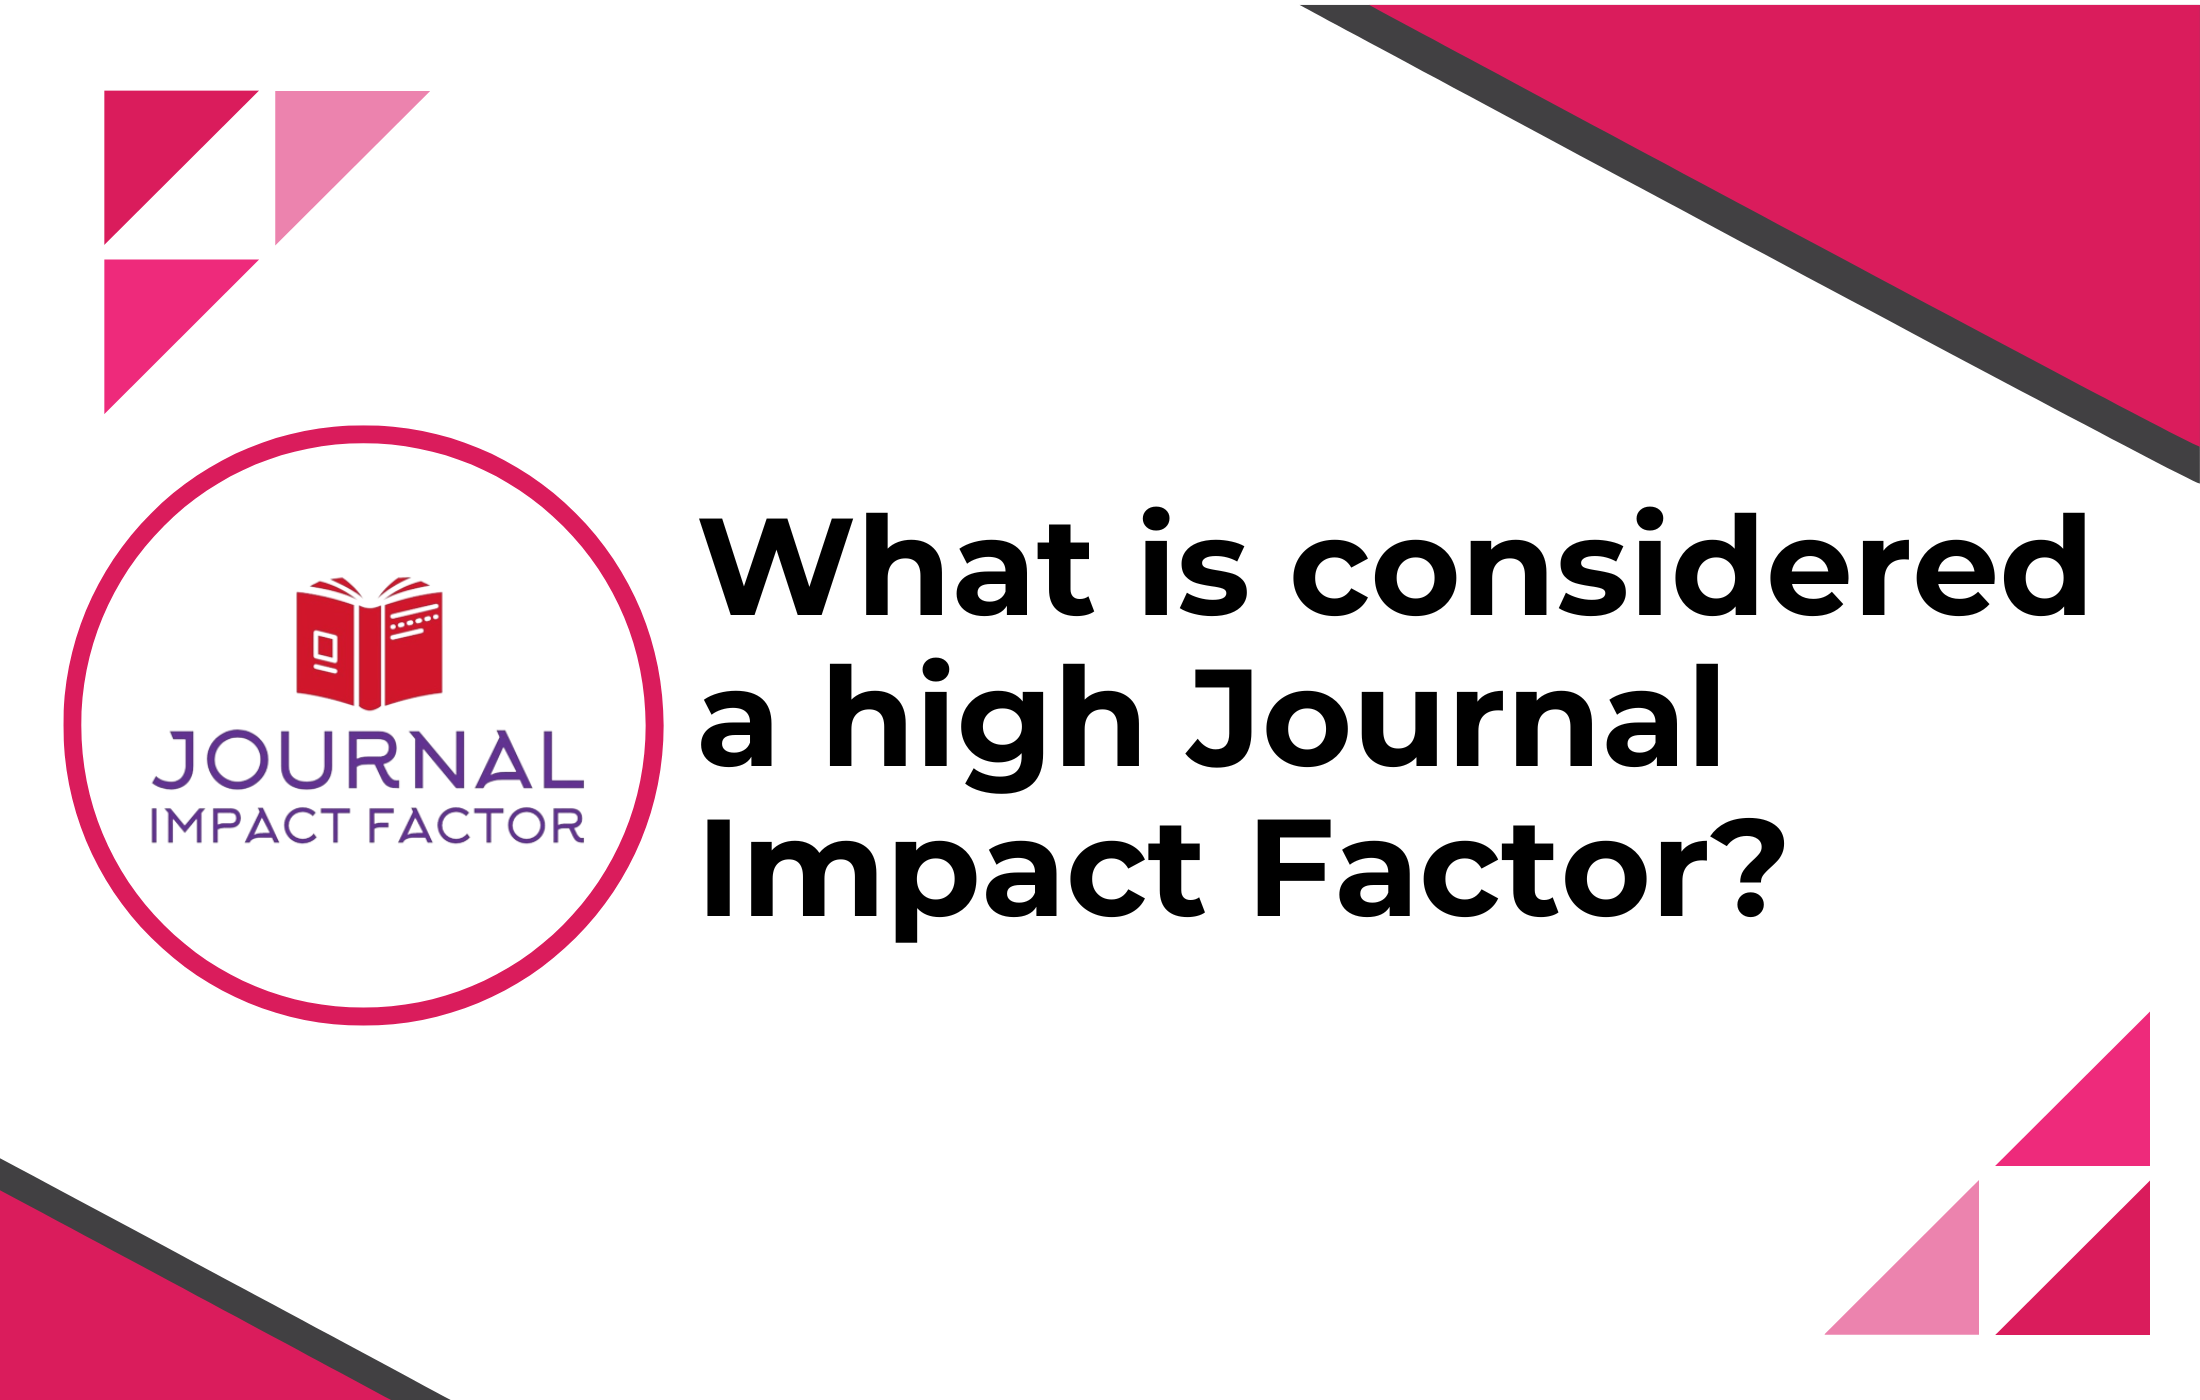 What is considered a high Journal Impact Factor